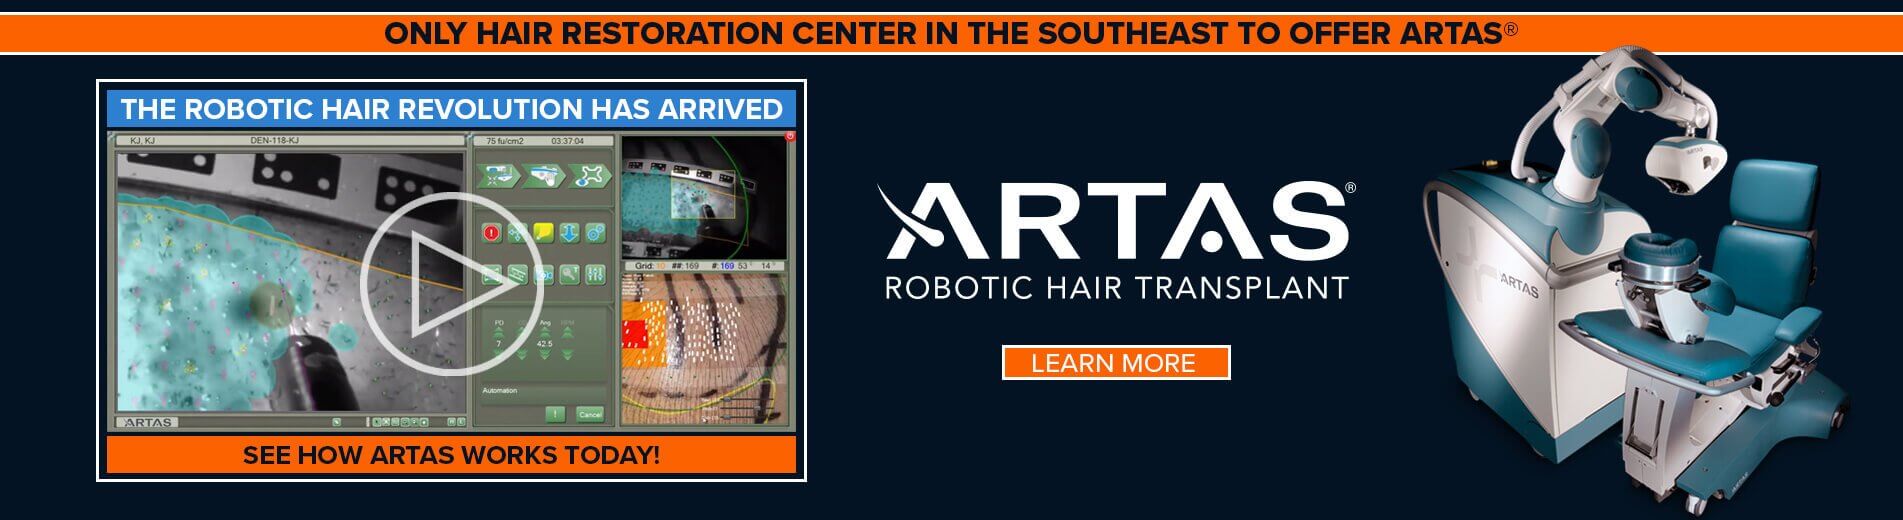 Only Hair Restoration Center in the Southeast to Offer ARTAS®